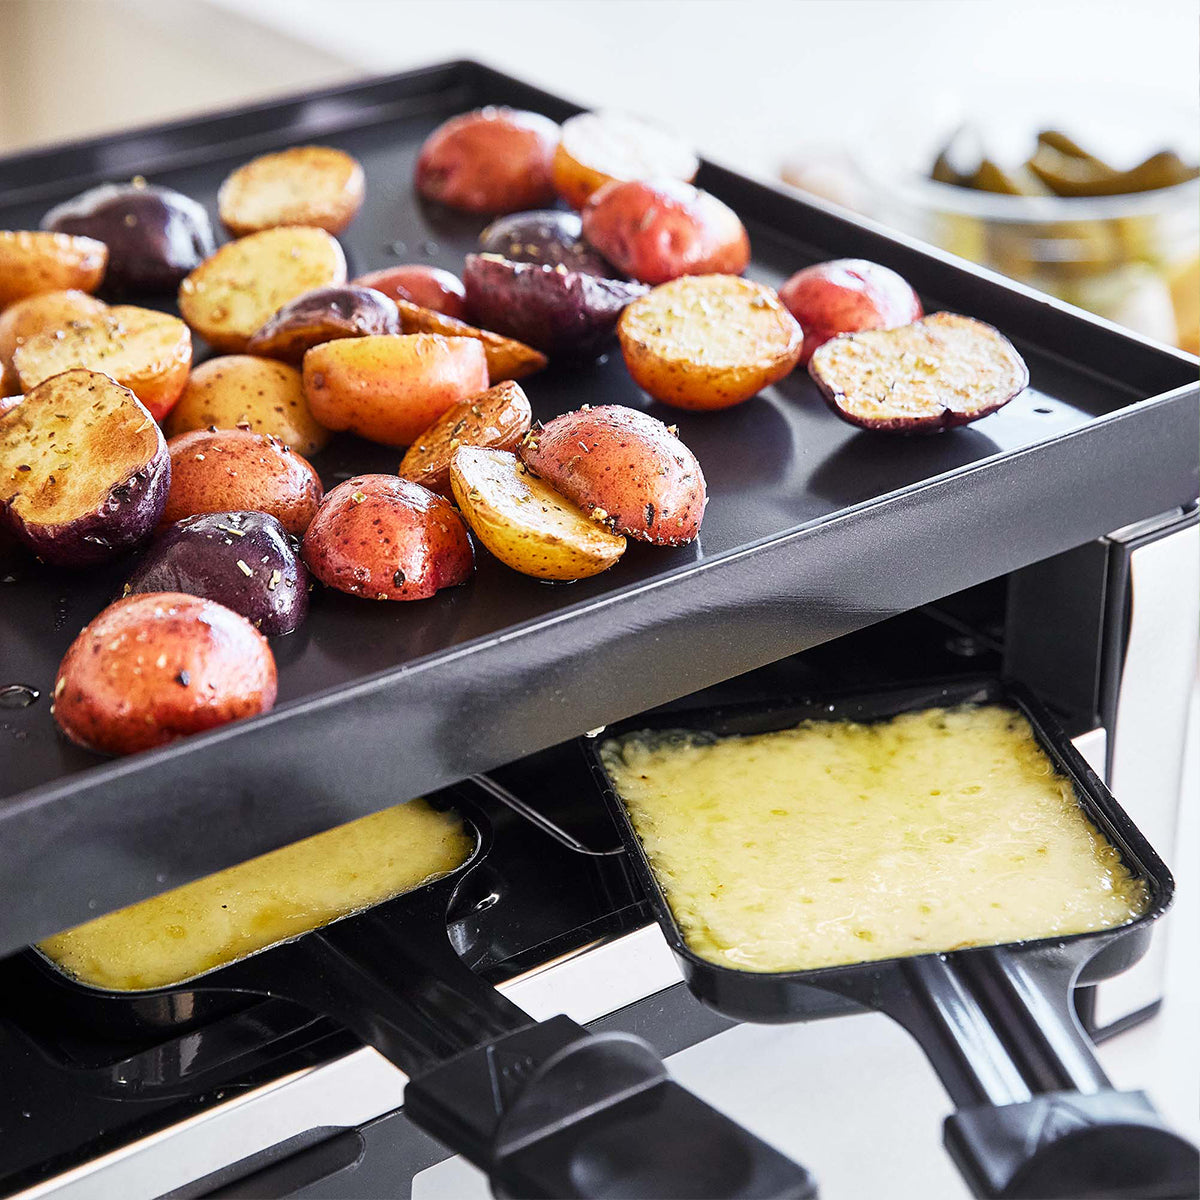 GreenPan Tackles Grilling Indoors With New Launch